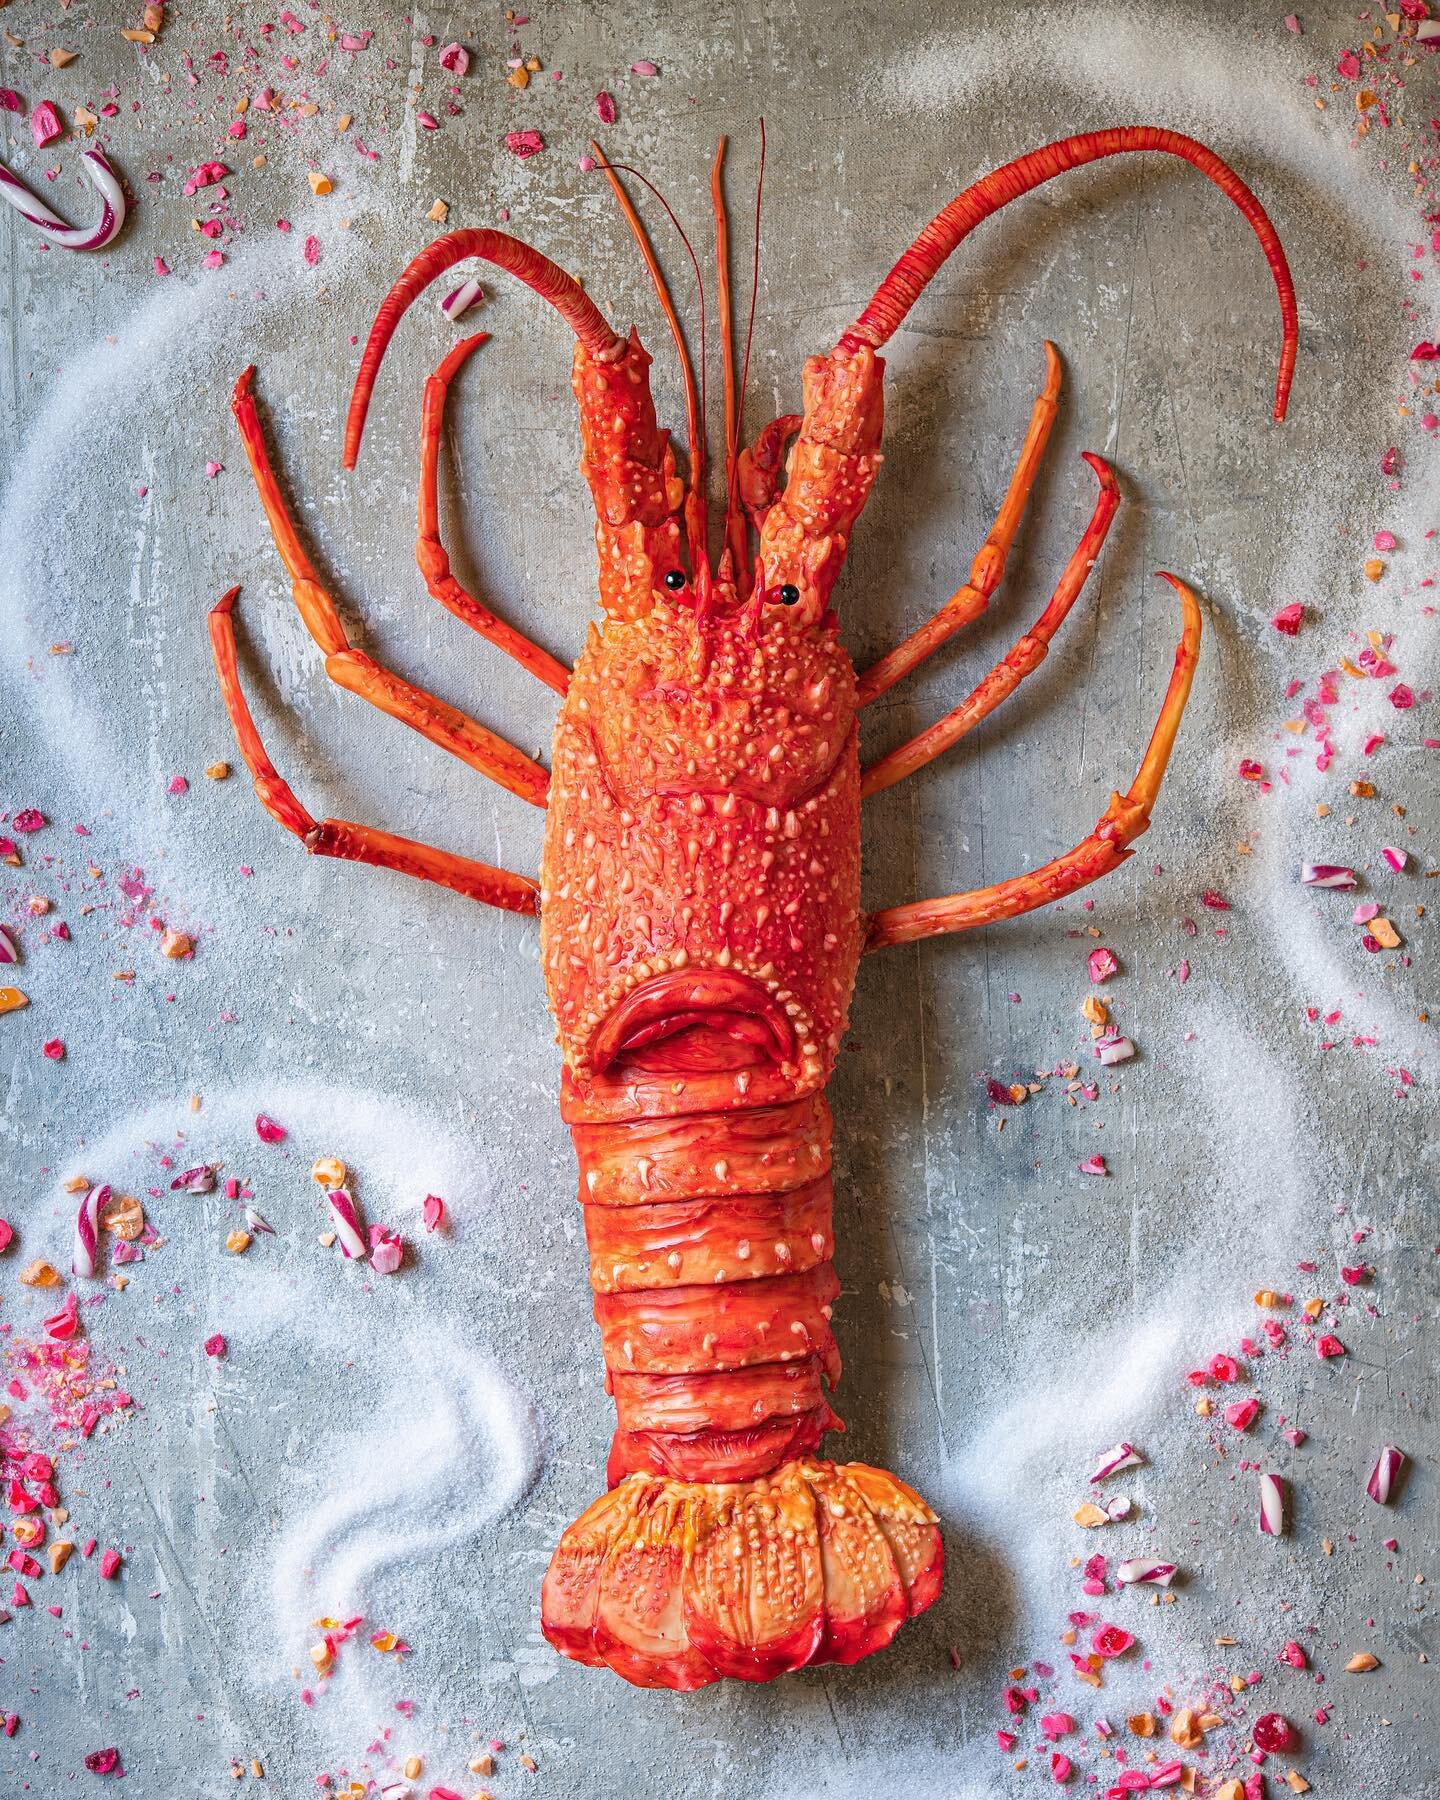 A gingerbread Xmas crayfish 🦞 
A very different gingerbread build for Xmas this year and a nod the the iconic Australian Xmas indulgence.
All orange spiced gingerbread and modelling chocolate, with white chocolate accents for added bumpiness.
A litt